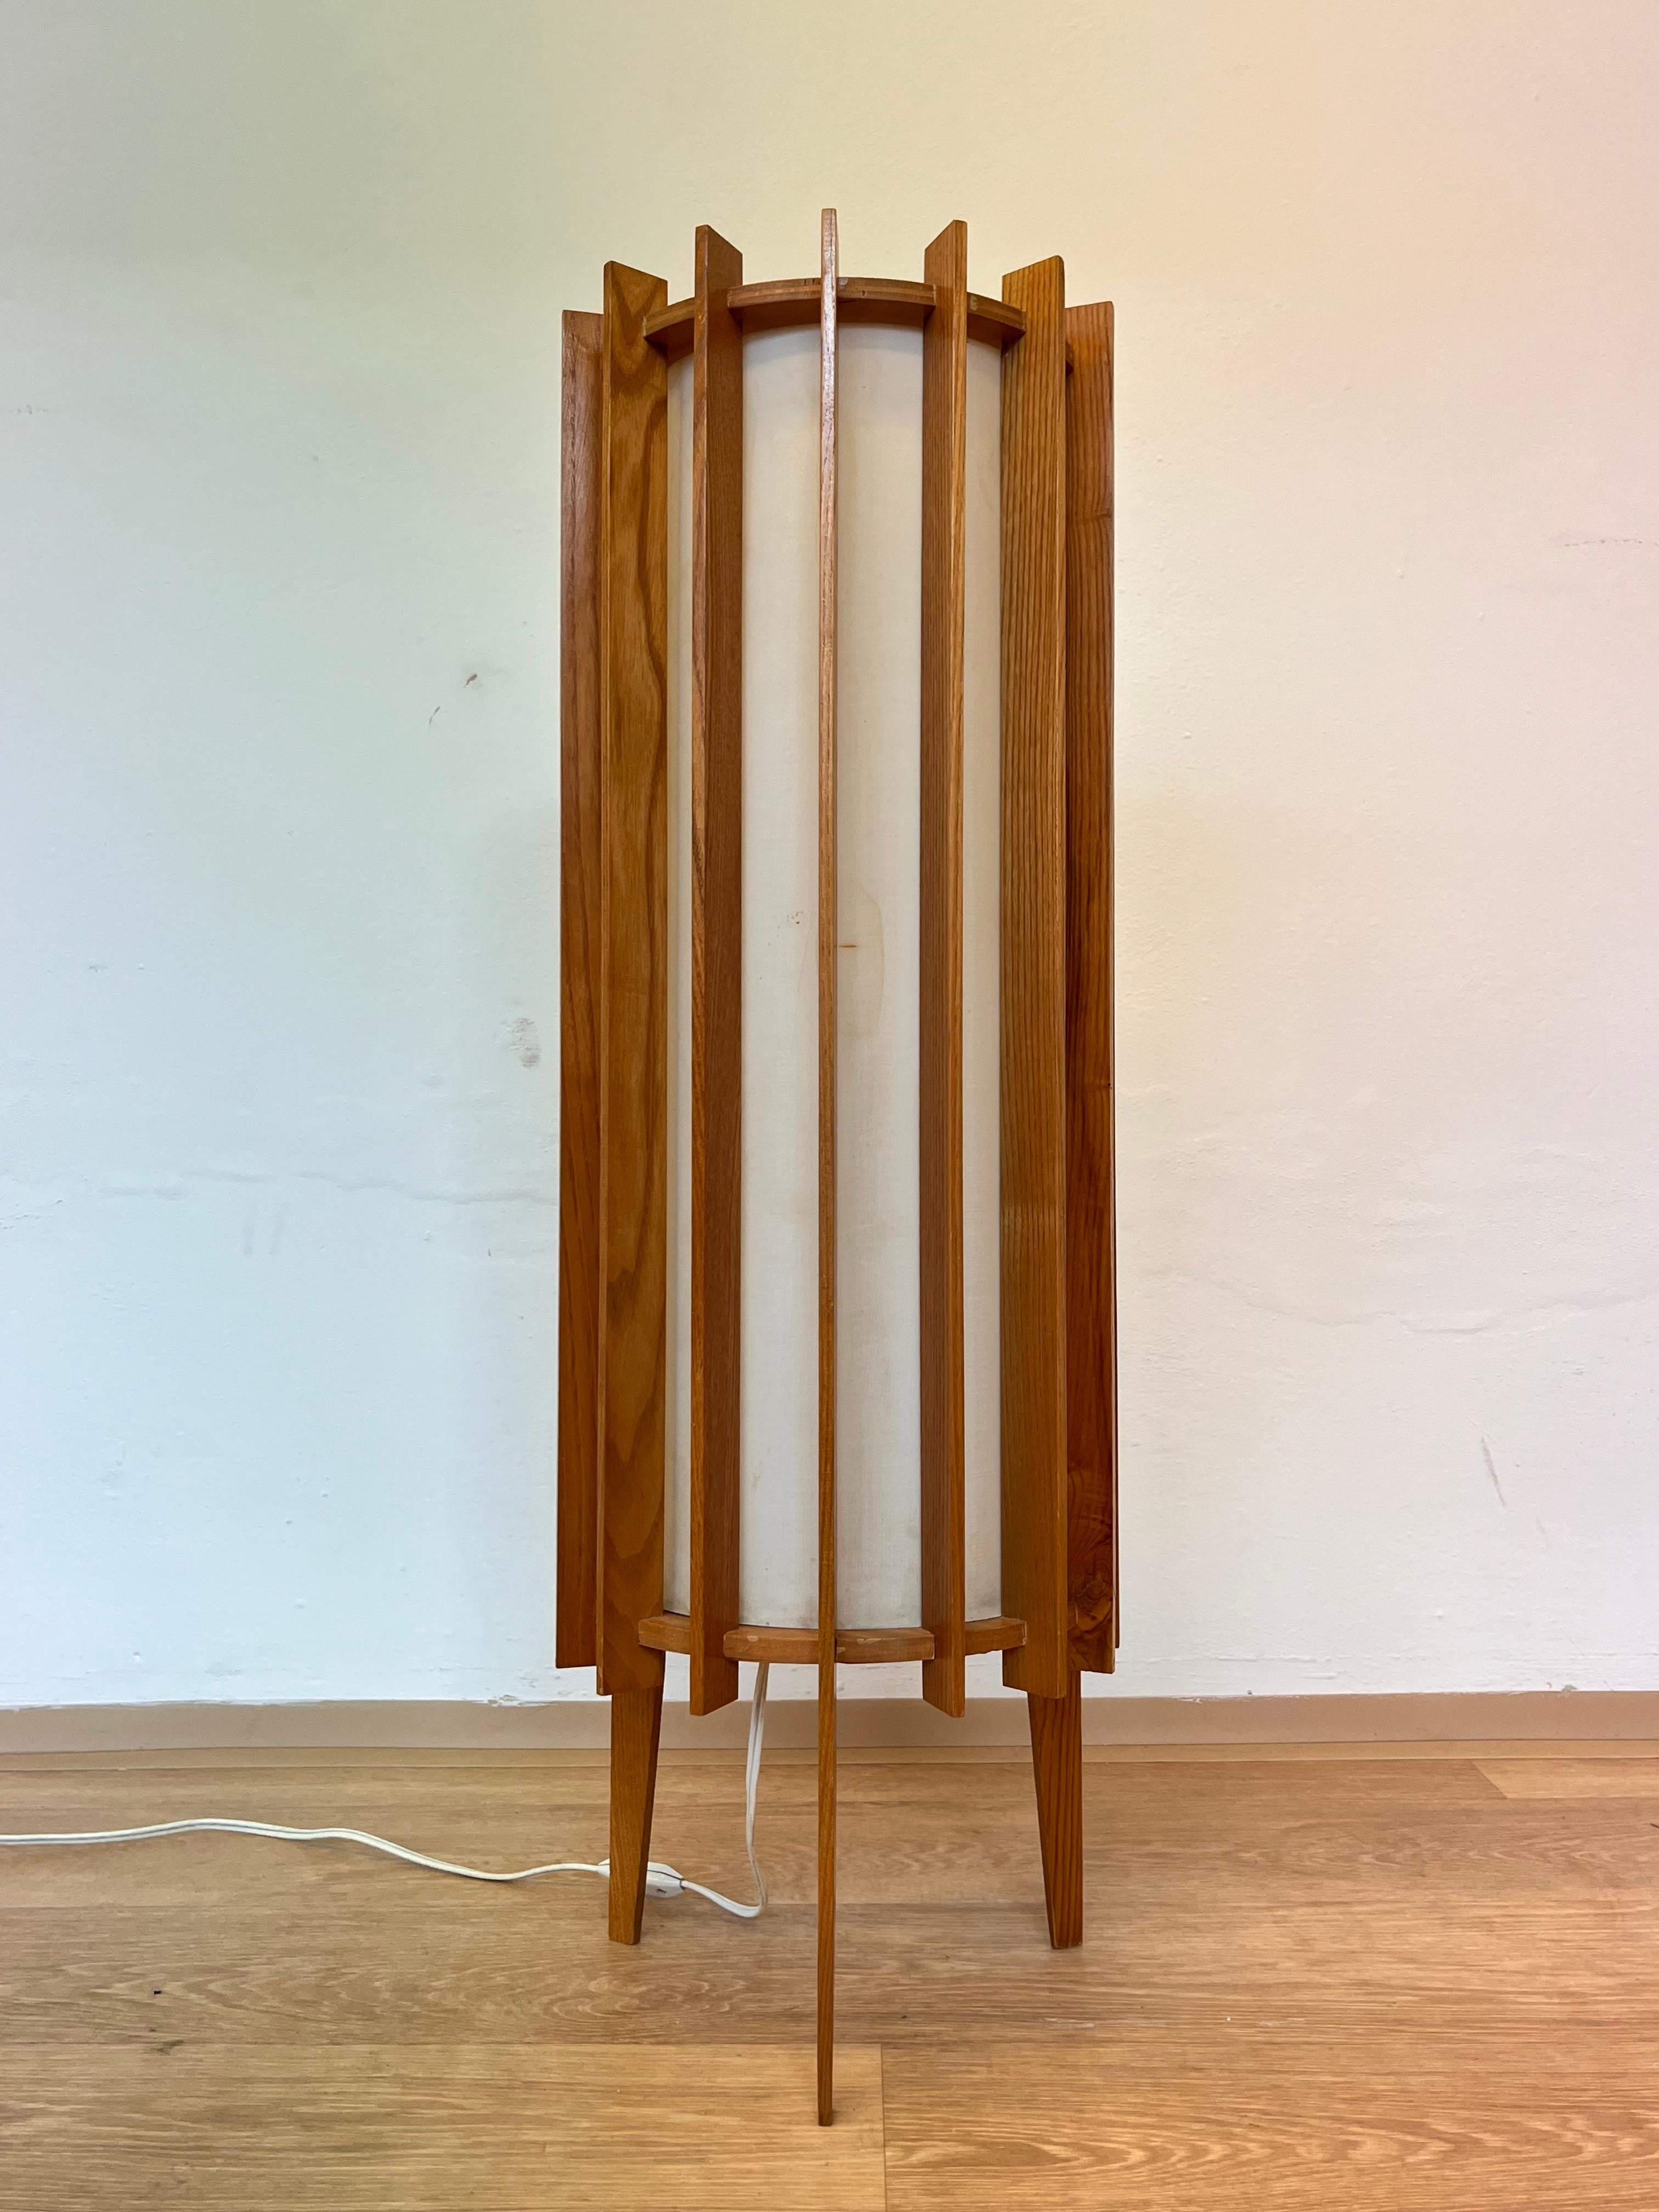 Plastic Ib Fabiansen wooden SPACE AGE Floor Lamp by Fog and Mørup - Denmark - 1960s For Sale